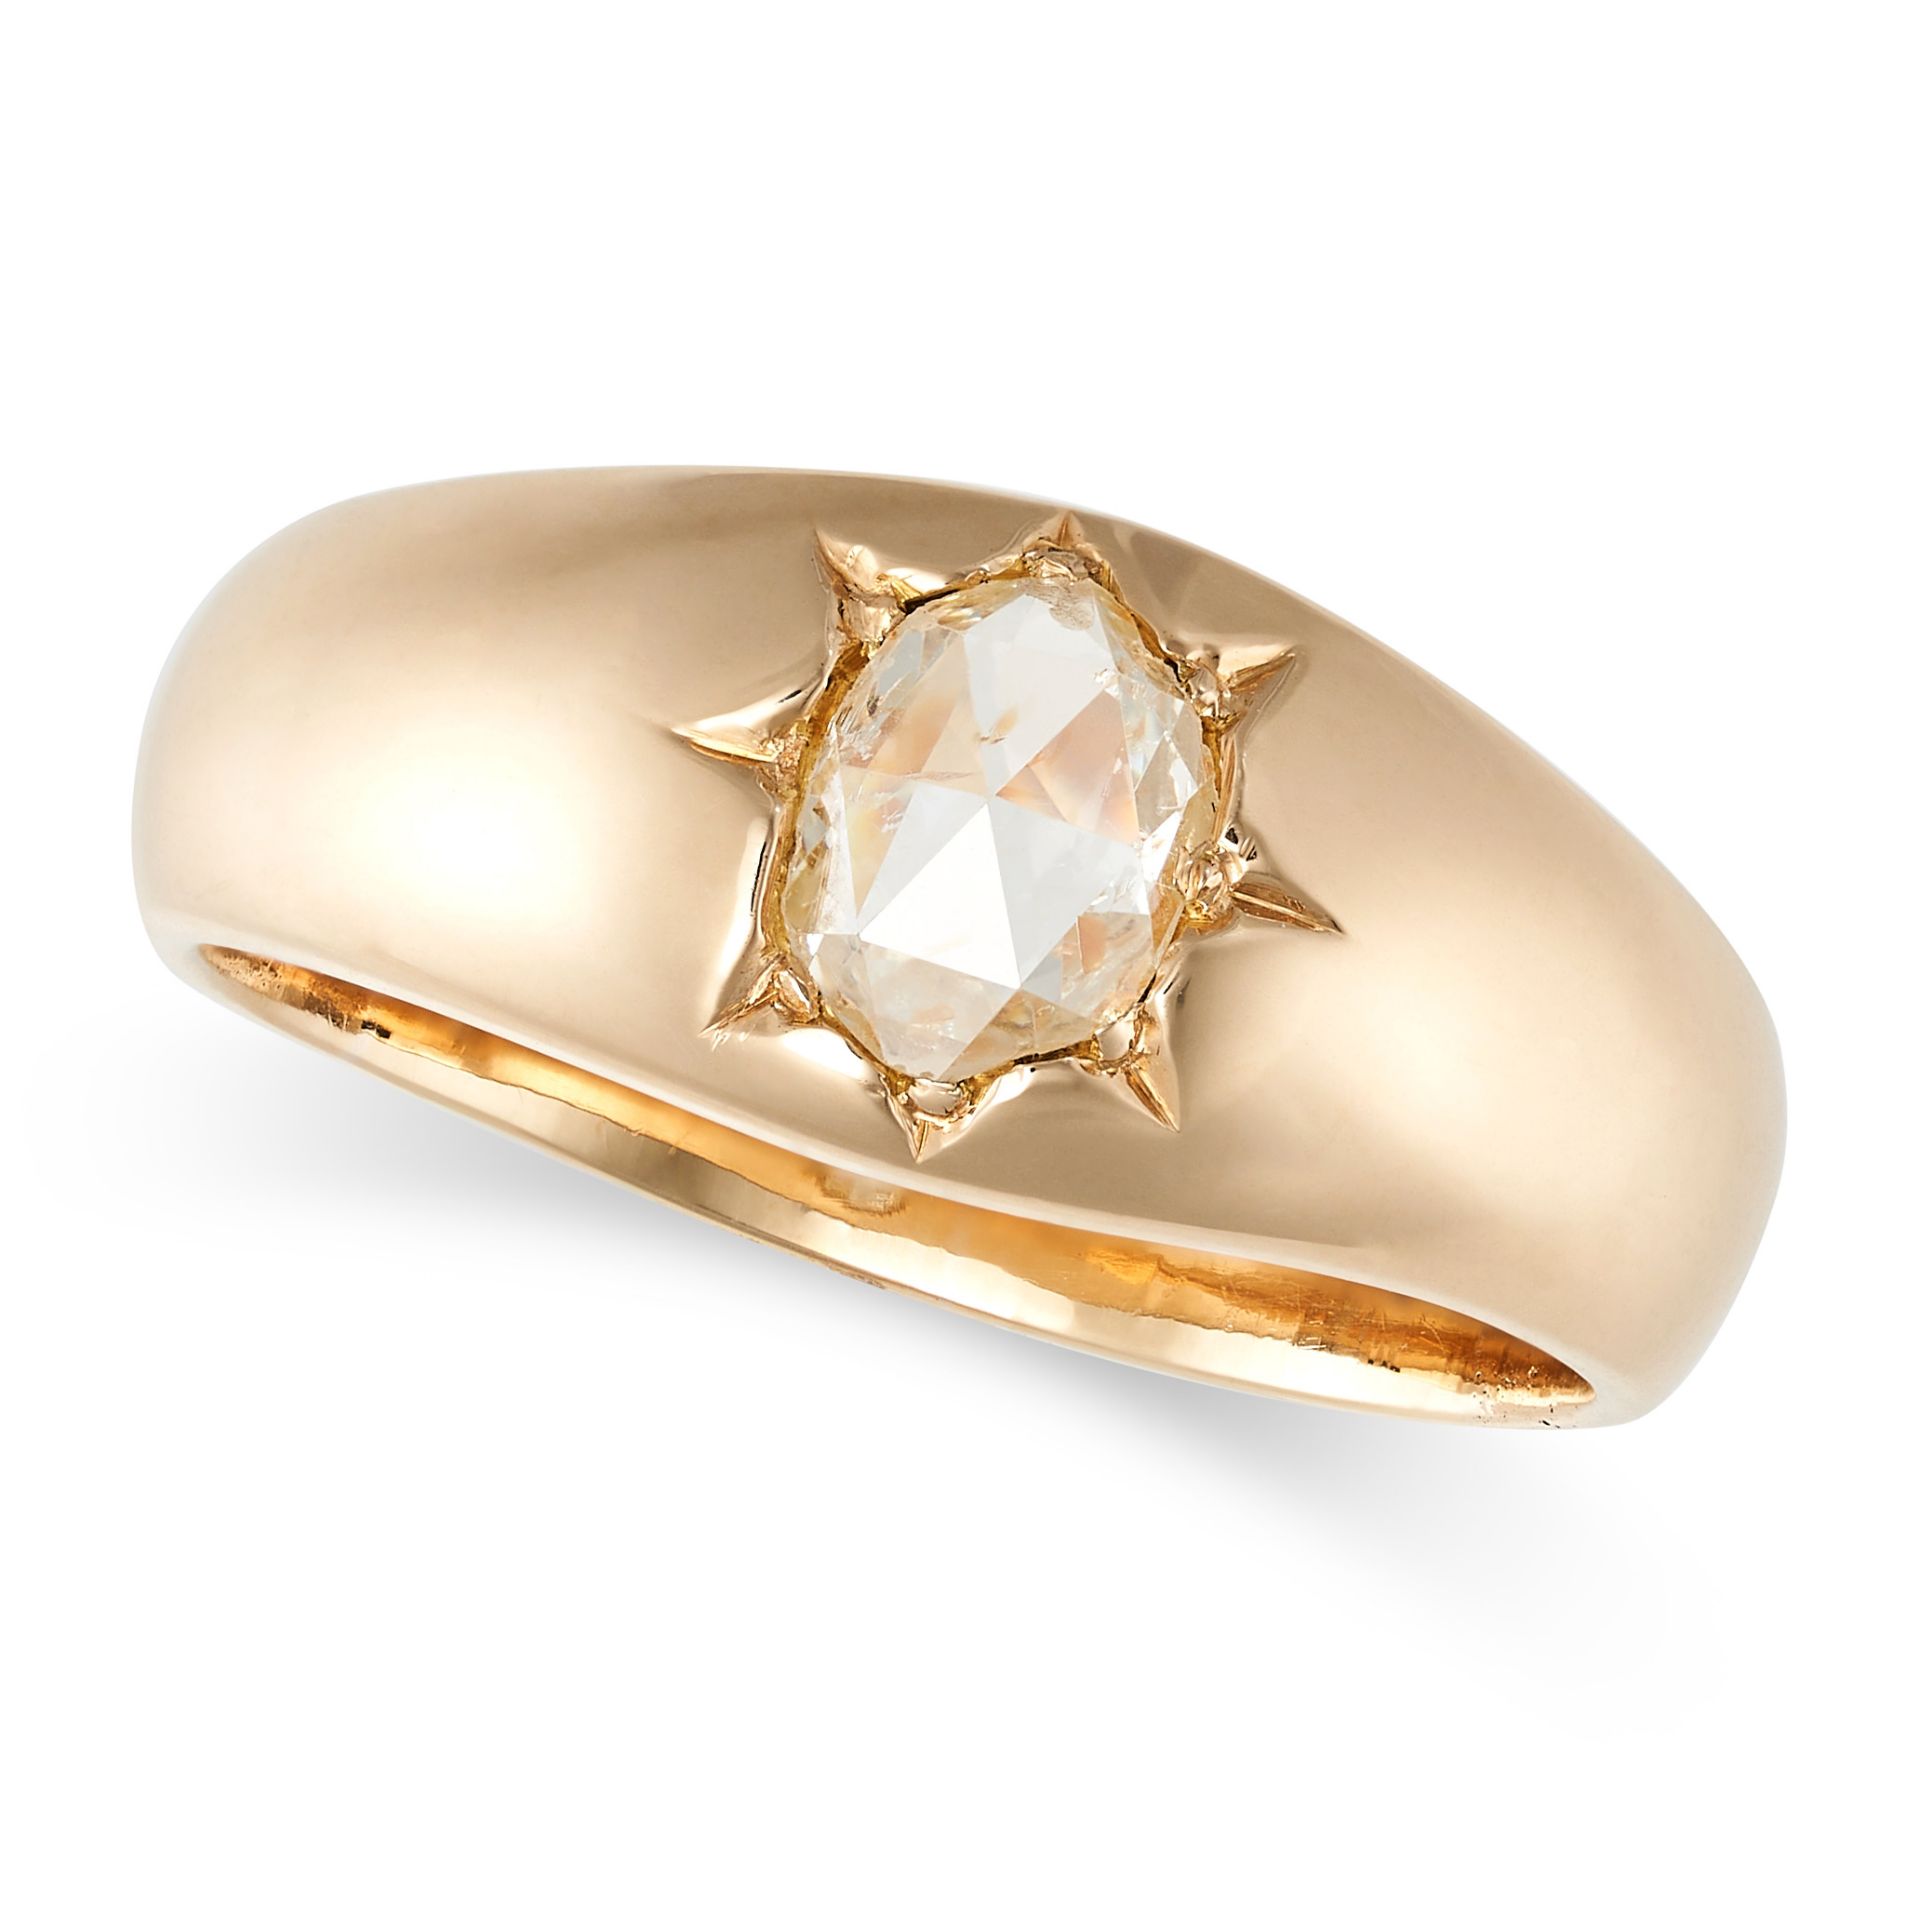 A DIAMOND GYPSY RING in 18ct yellow gold, set with a rose cut diamond in a star motif, stamped 18...